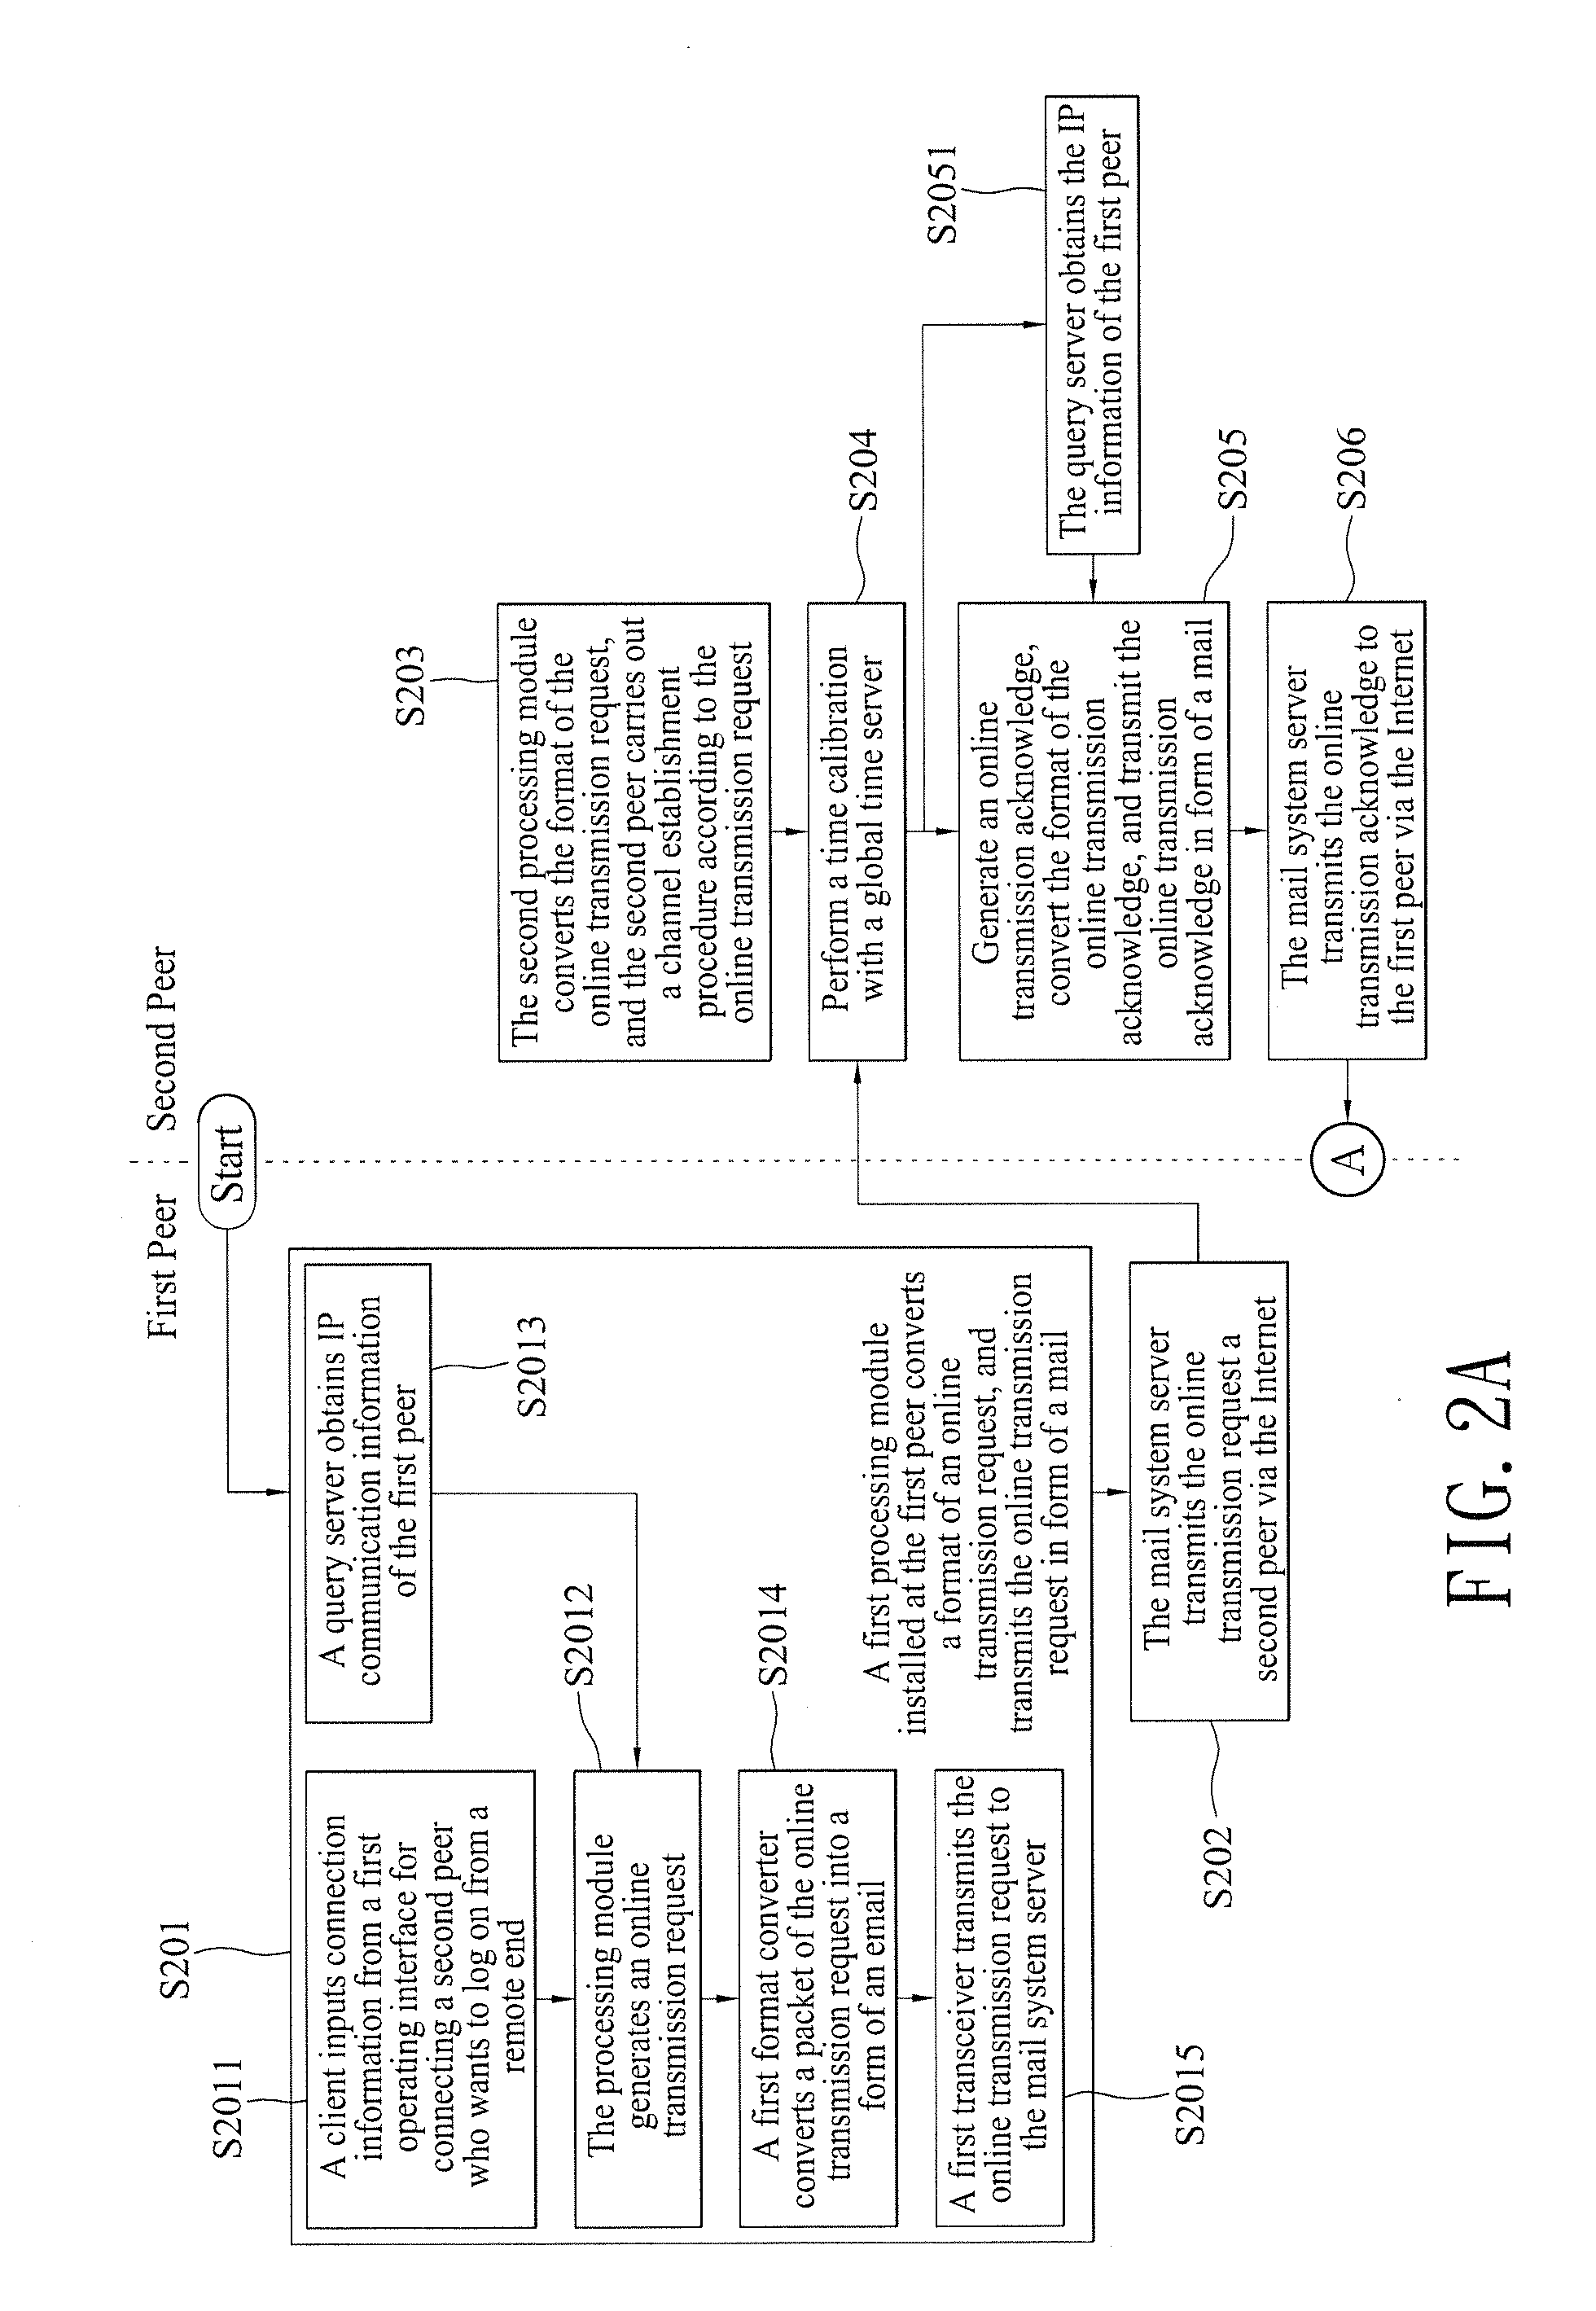 Peer-to-peer connection establishment method and system